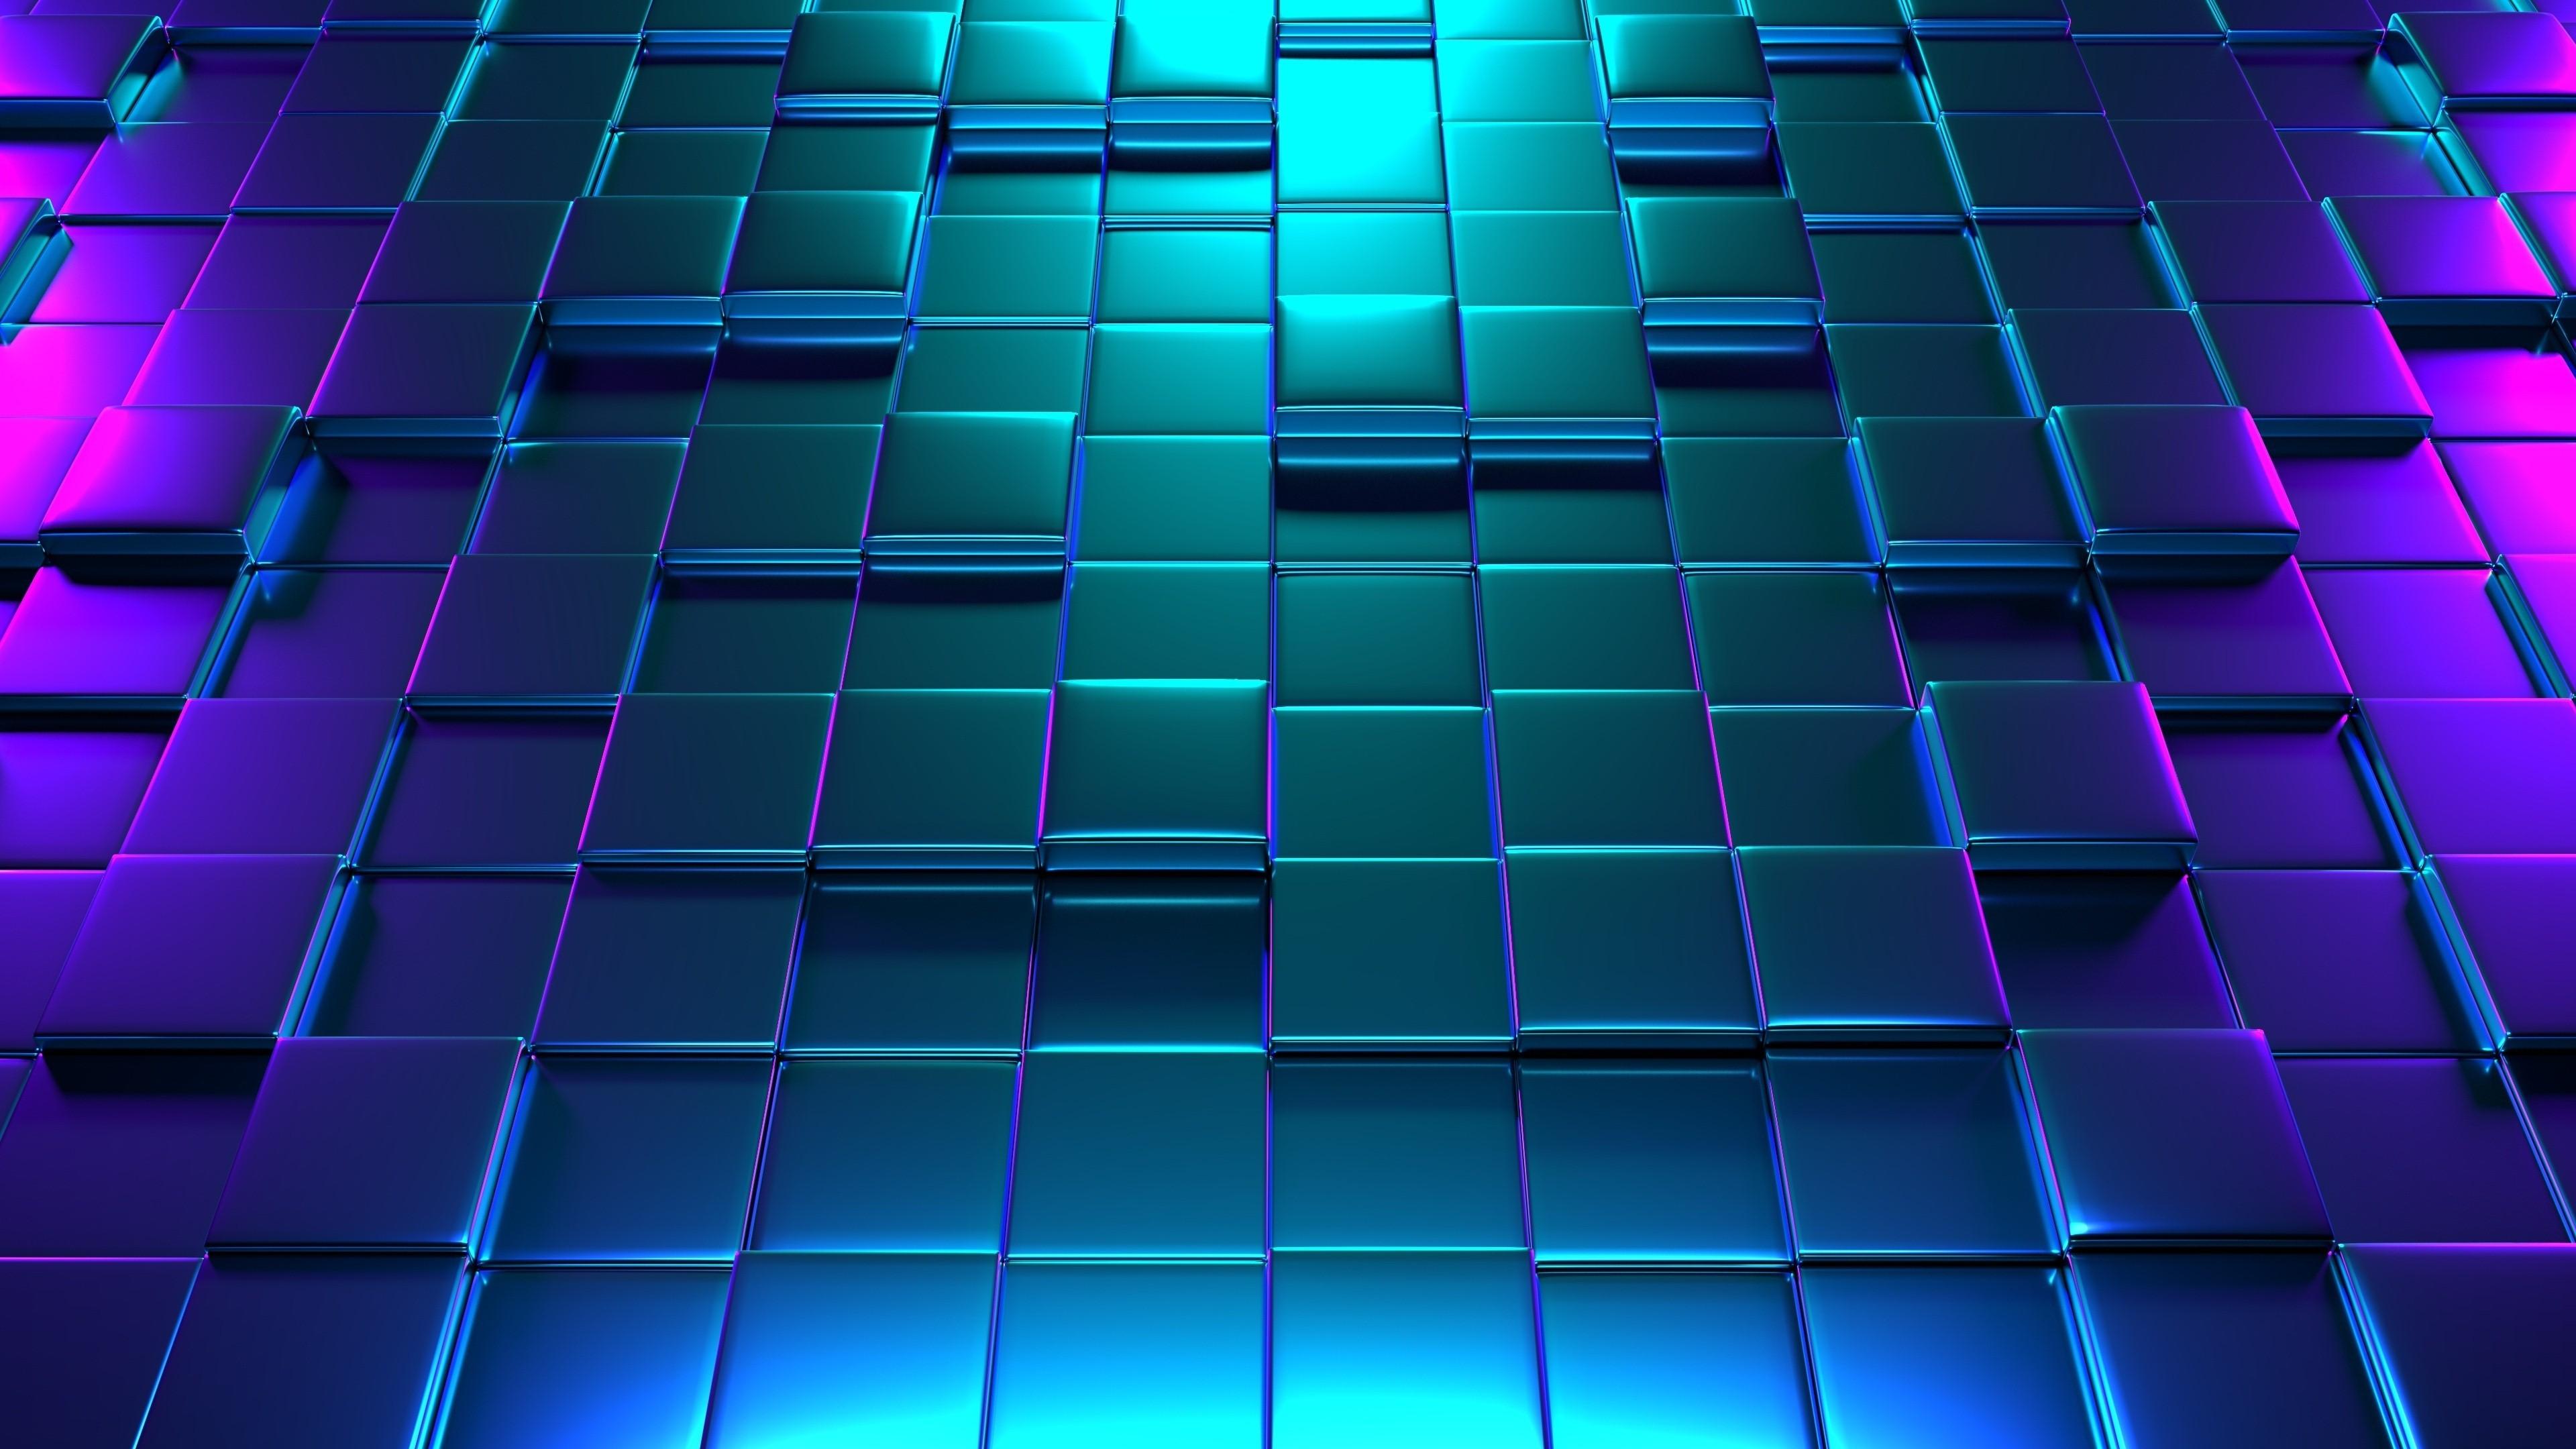 4K Wallpapers of 3D Colorful Cubes